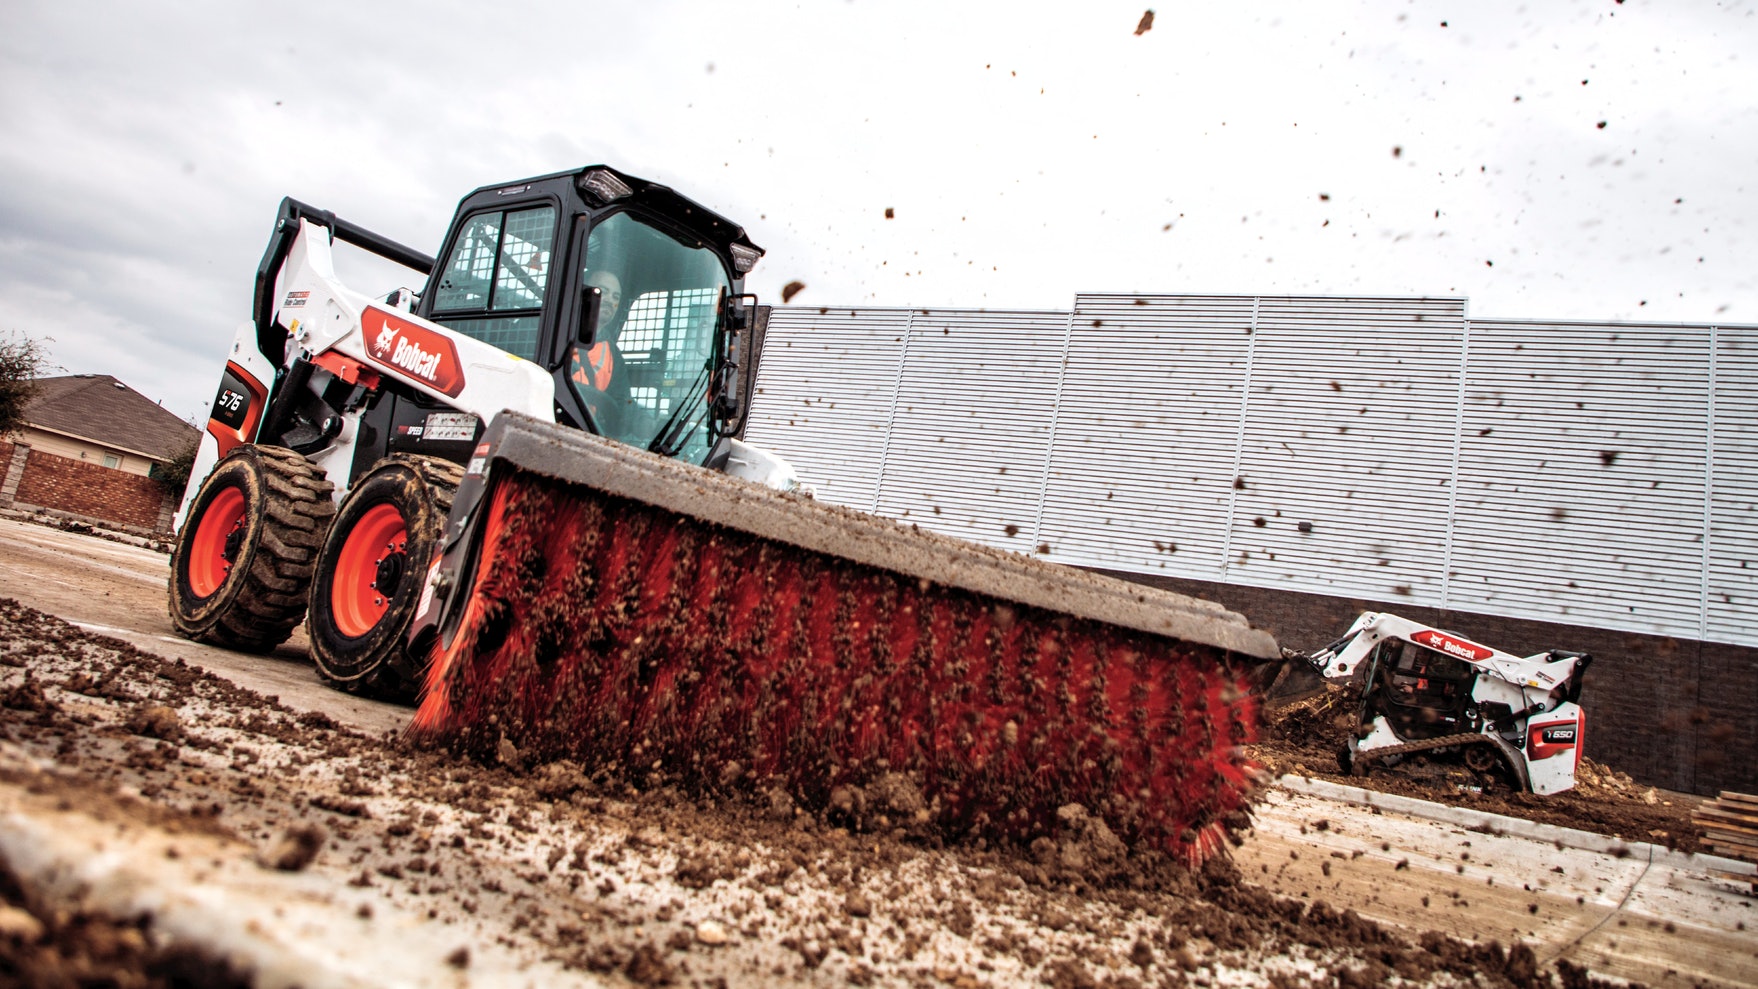 Bobcat To Debut These New Products And Technologies At Conexpo 2020 For Construction Pros